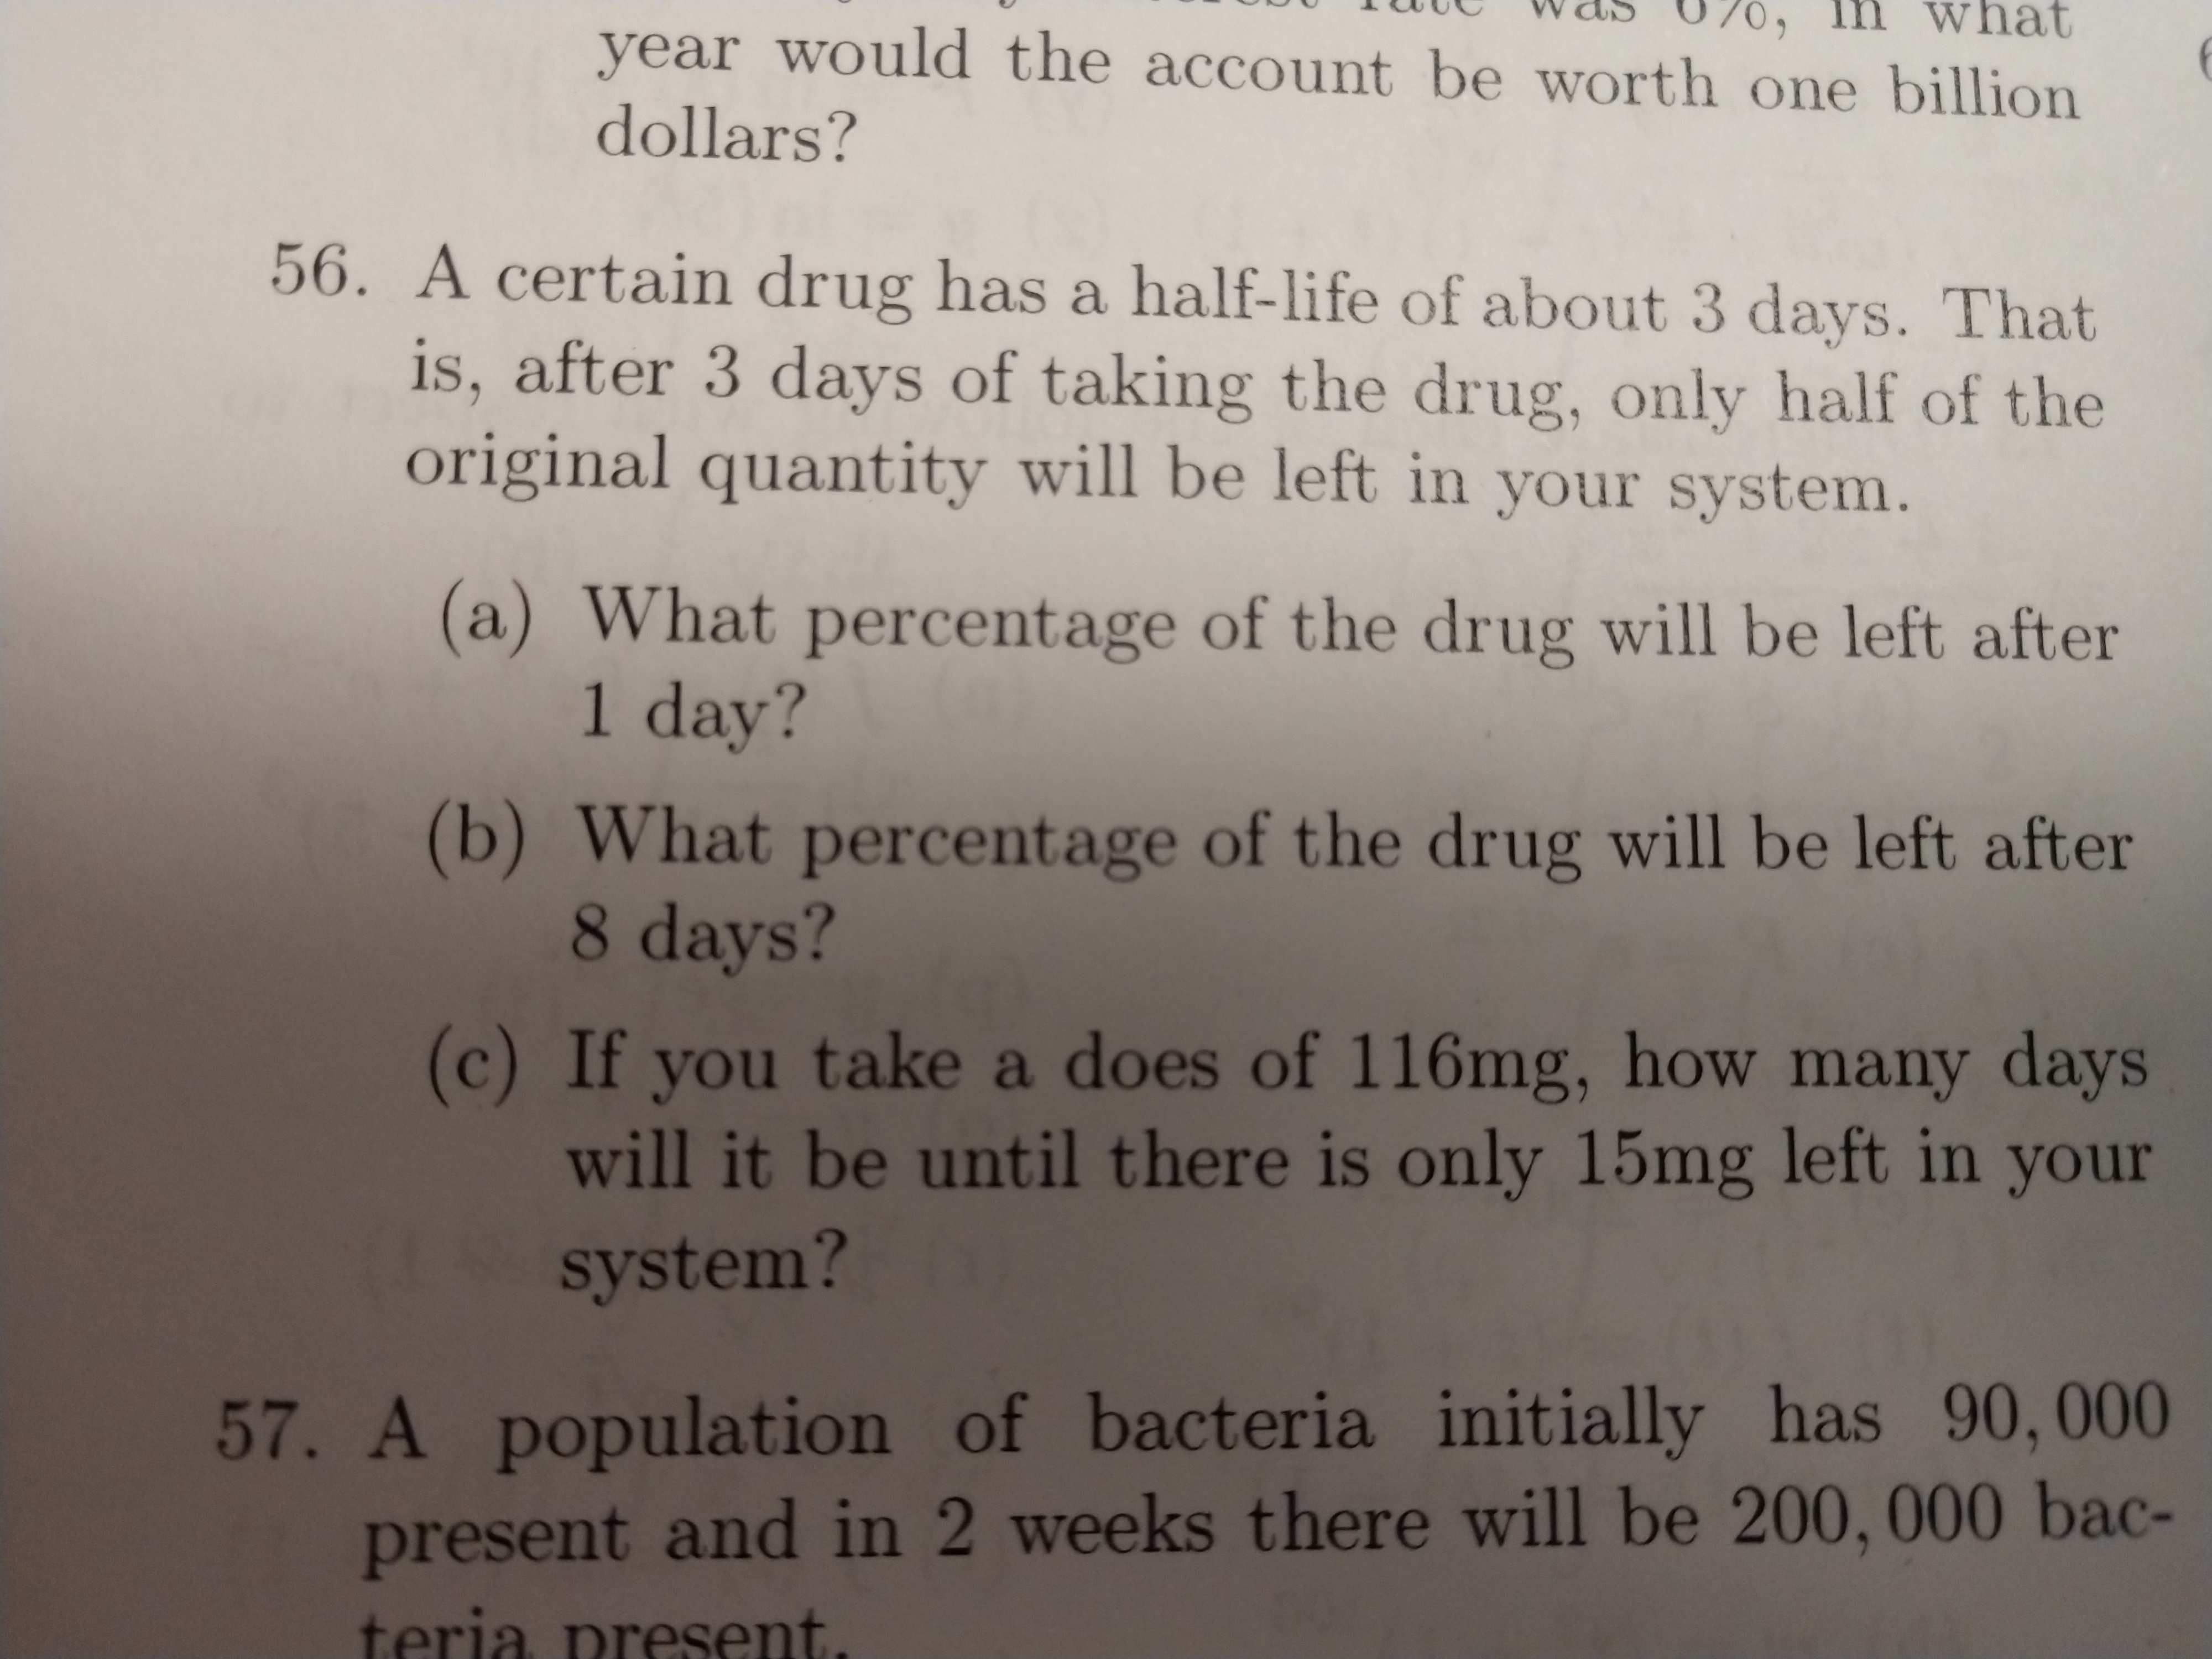 what
070,
year would the account be worth one billion
dollars?
56. A certain drug has a half-life of about 3 days. That
is, after 3 days of taking the drug, only half of the
original quantity will be left in your system.
(a) What percentage of the drug will be left after
1 day?
(b) What percentage of the drug will be left after
8 days?
(c) If you take a does of 116mg, how many days
will it be until there is only 15mg left in your
system?
57. A population of bacteria initially has 90,000
present and in 2 weeks there will be 200, 000 bac-
teria present
